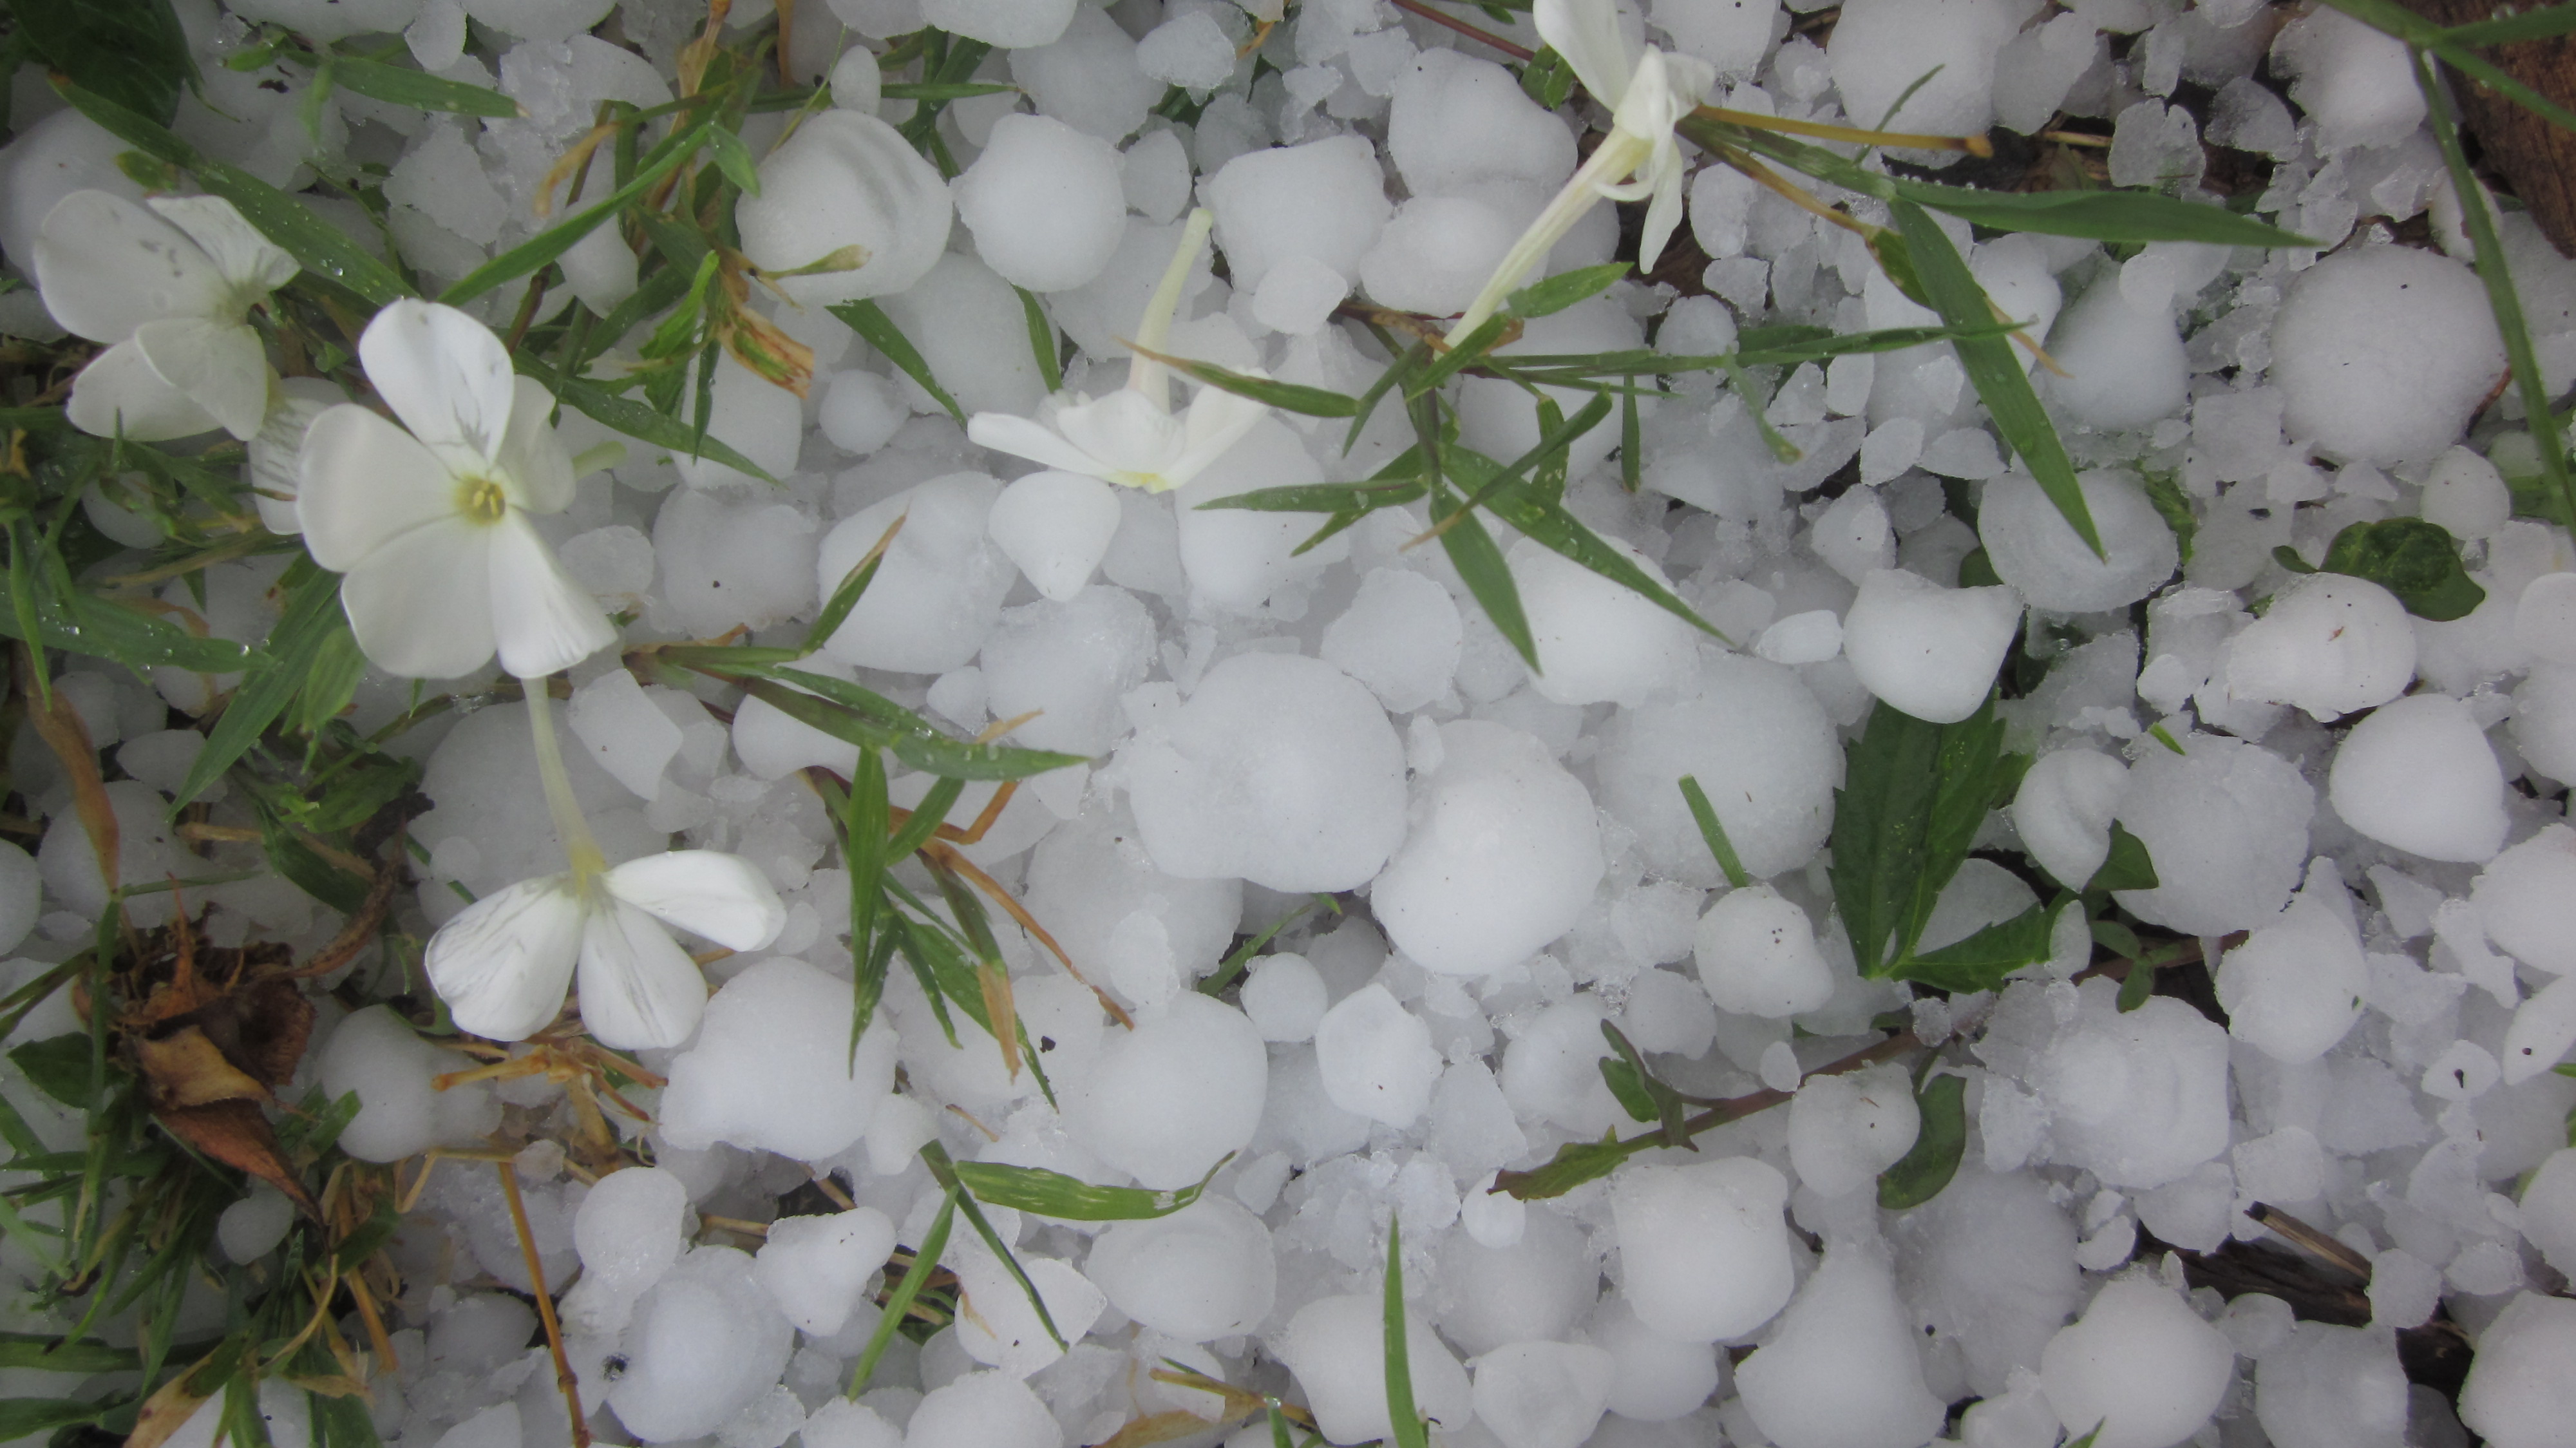 You win some, you lose some:  an afternoon hailstorm